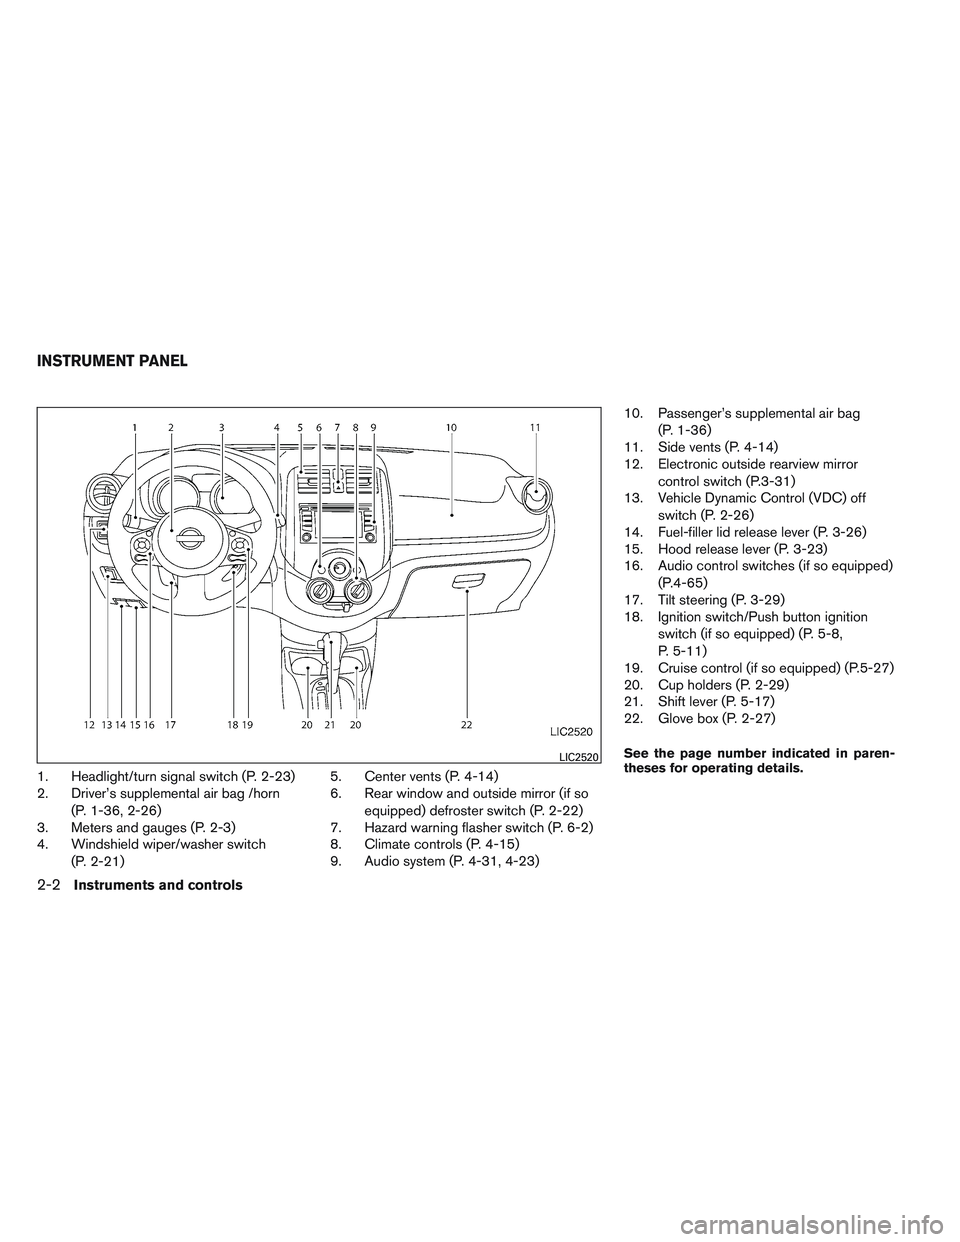 NISSAN VERSA 2014  Owners Manual 1. Headlight/turn signal switch (P. 2-23)
2. Driver’s supplemental air bag /horn(P. 1-36, 2-26)
3. Meters and gauges (P. 2-3)
4. Windshield wiper/washer switch
(P. 2-21) 5. Center vents (P. 4-14)
6.